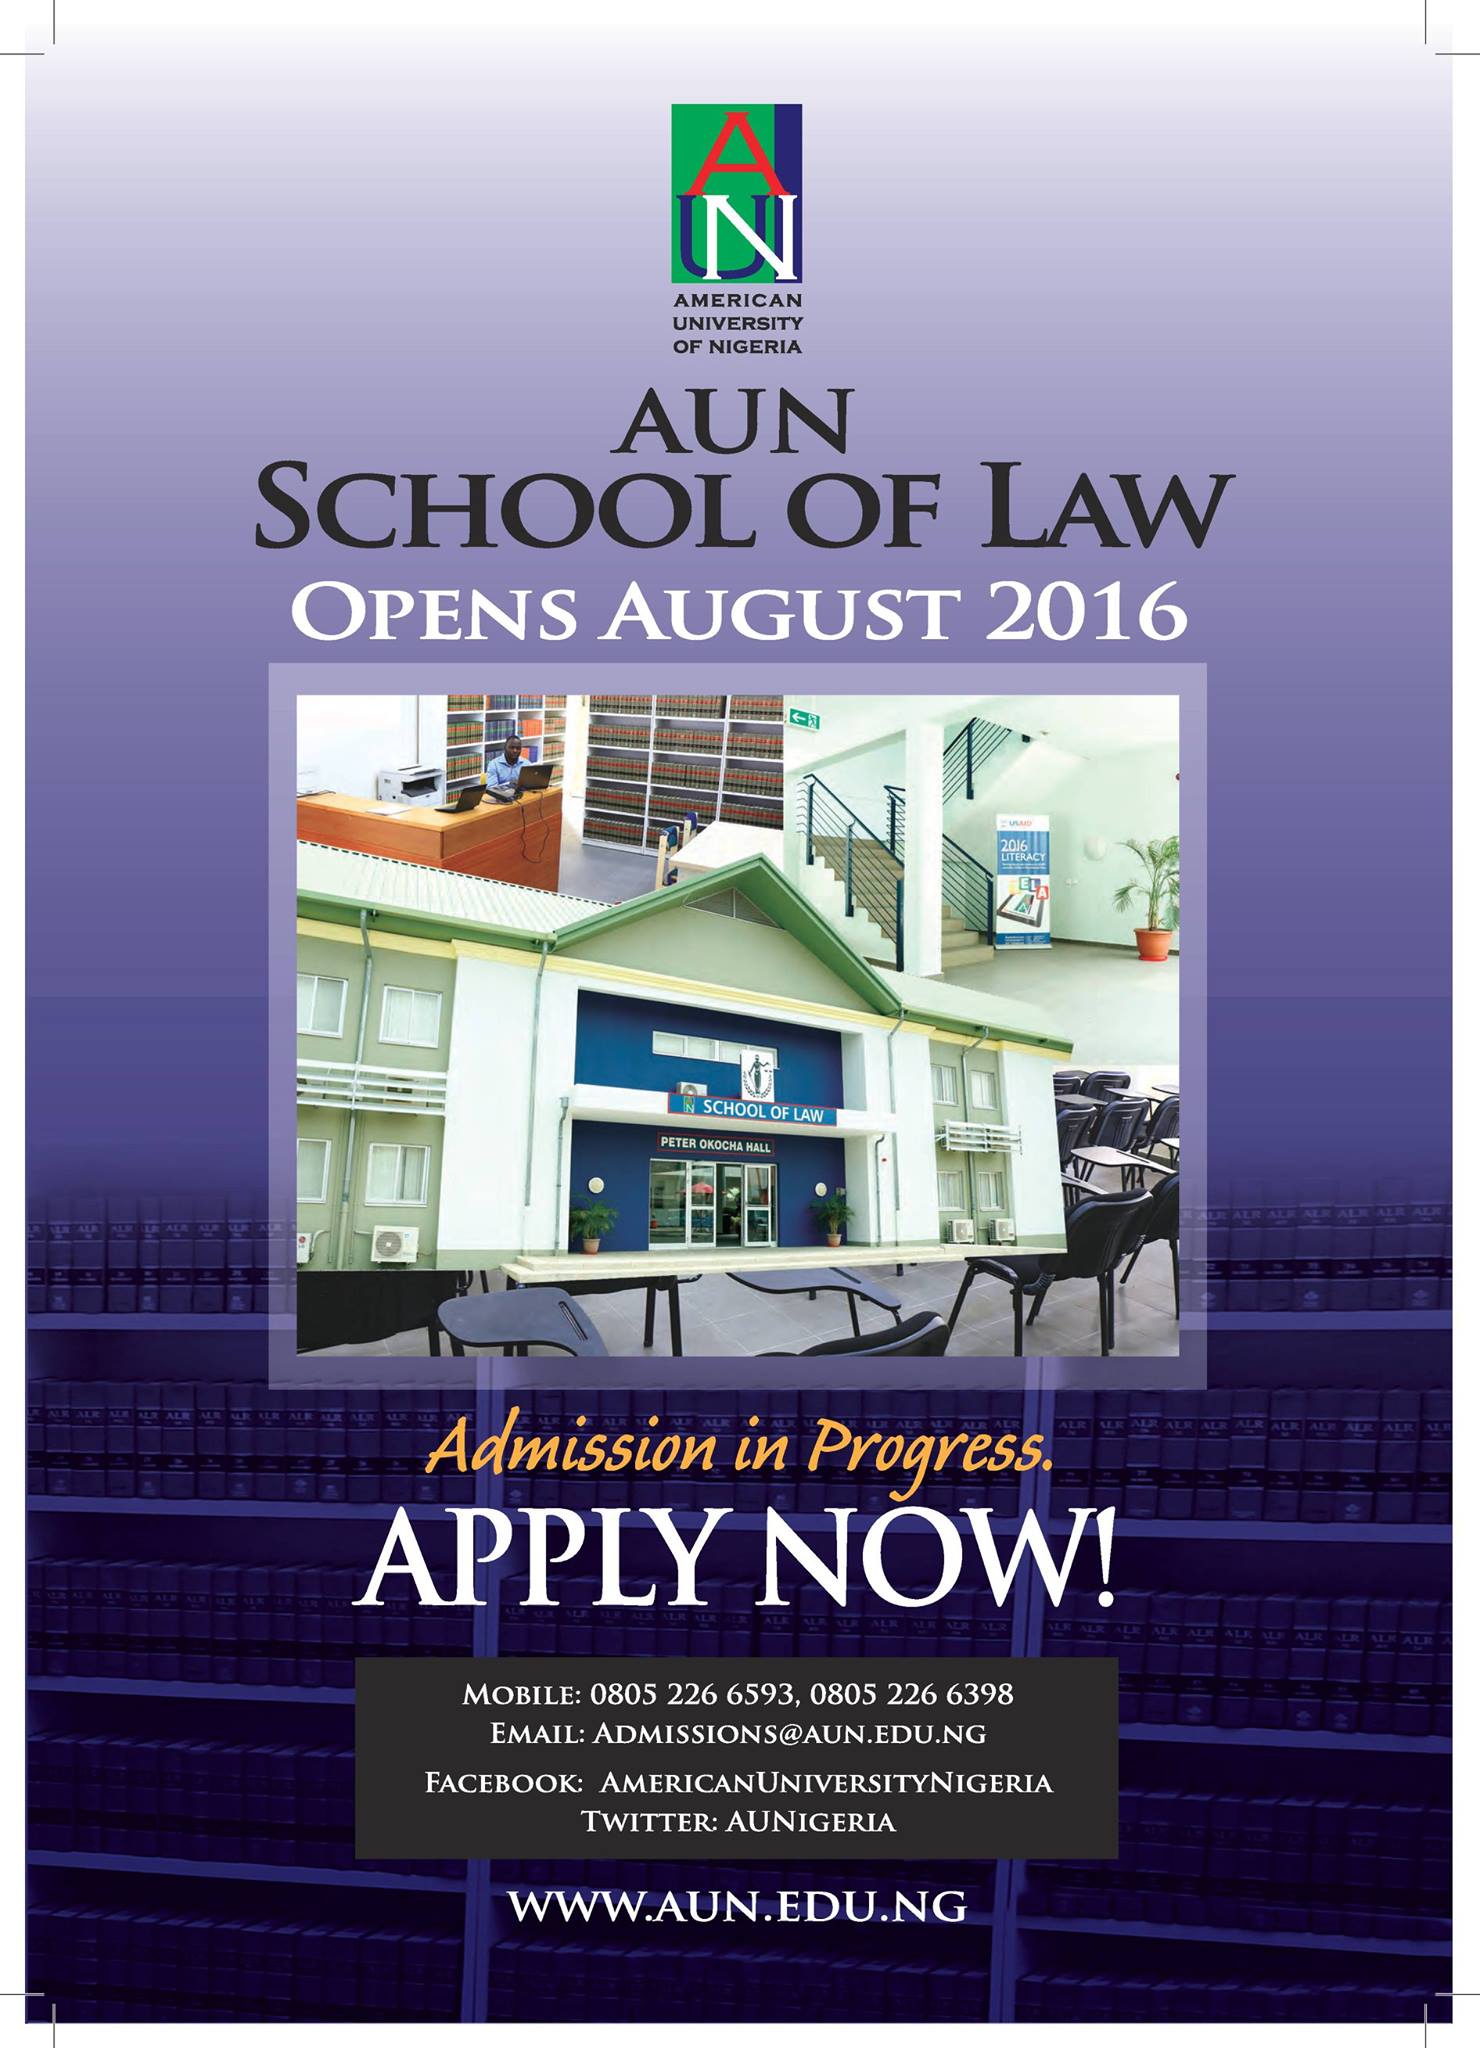 American University of Nigeria School of Law Admission Form is Out - 2016/17